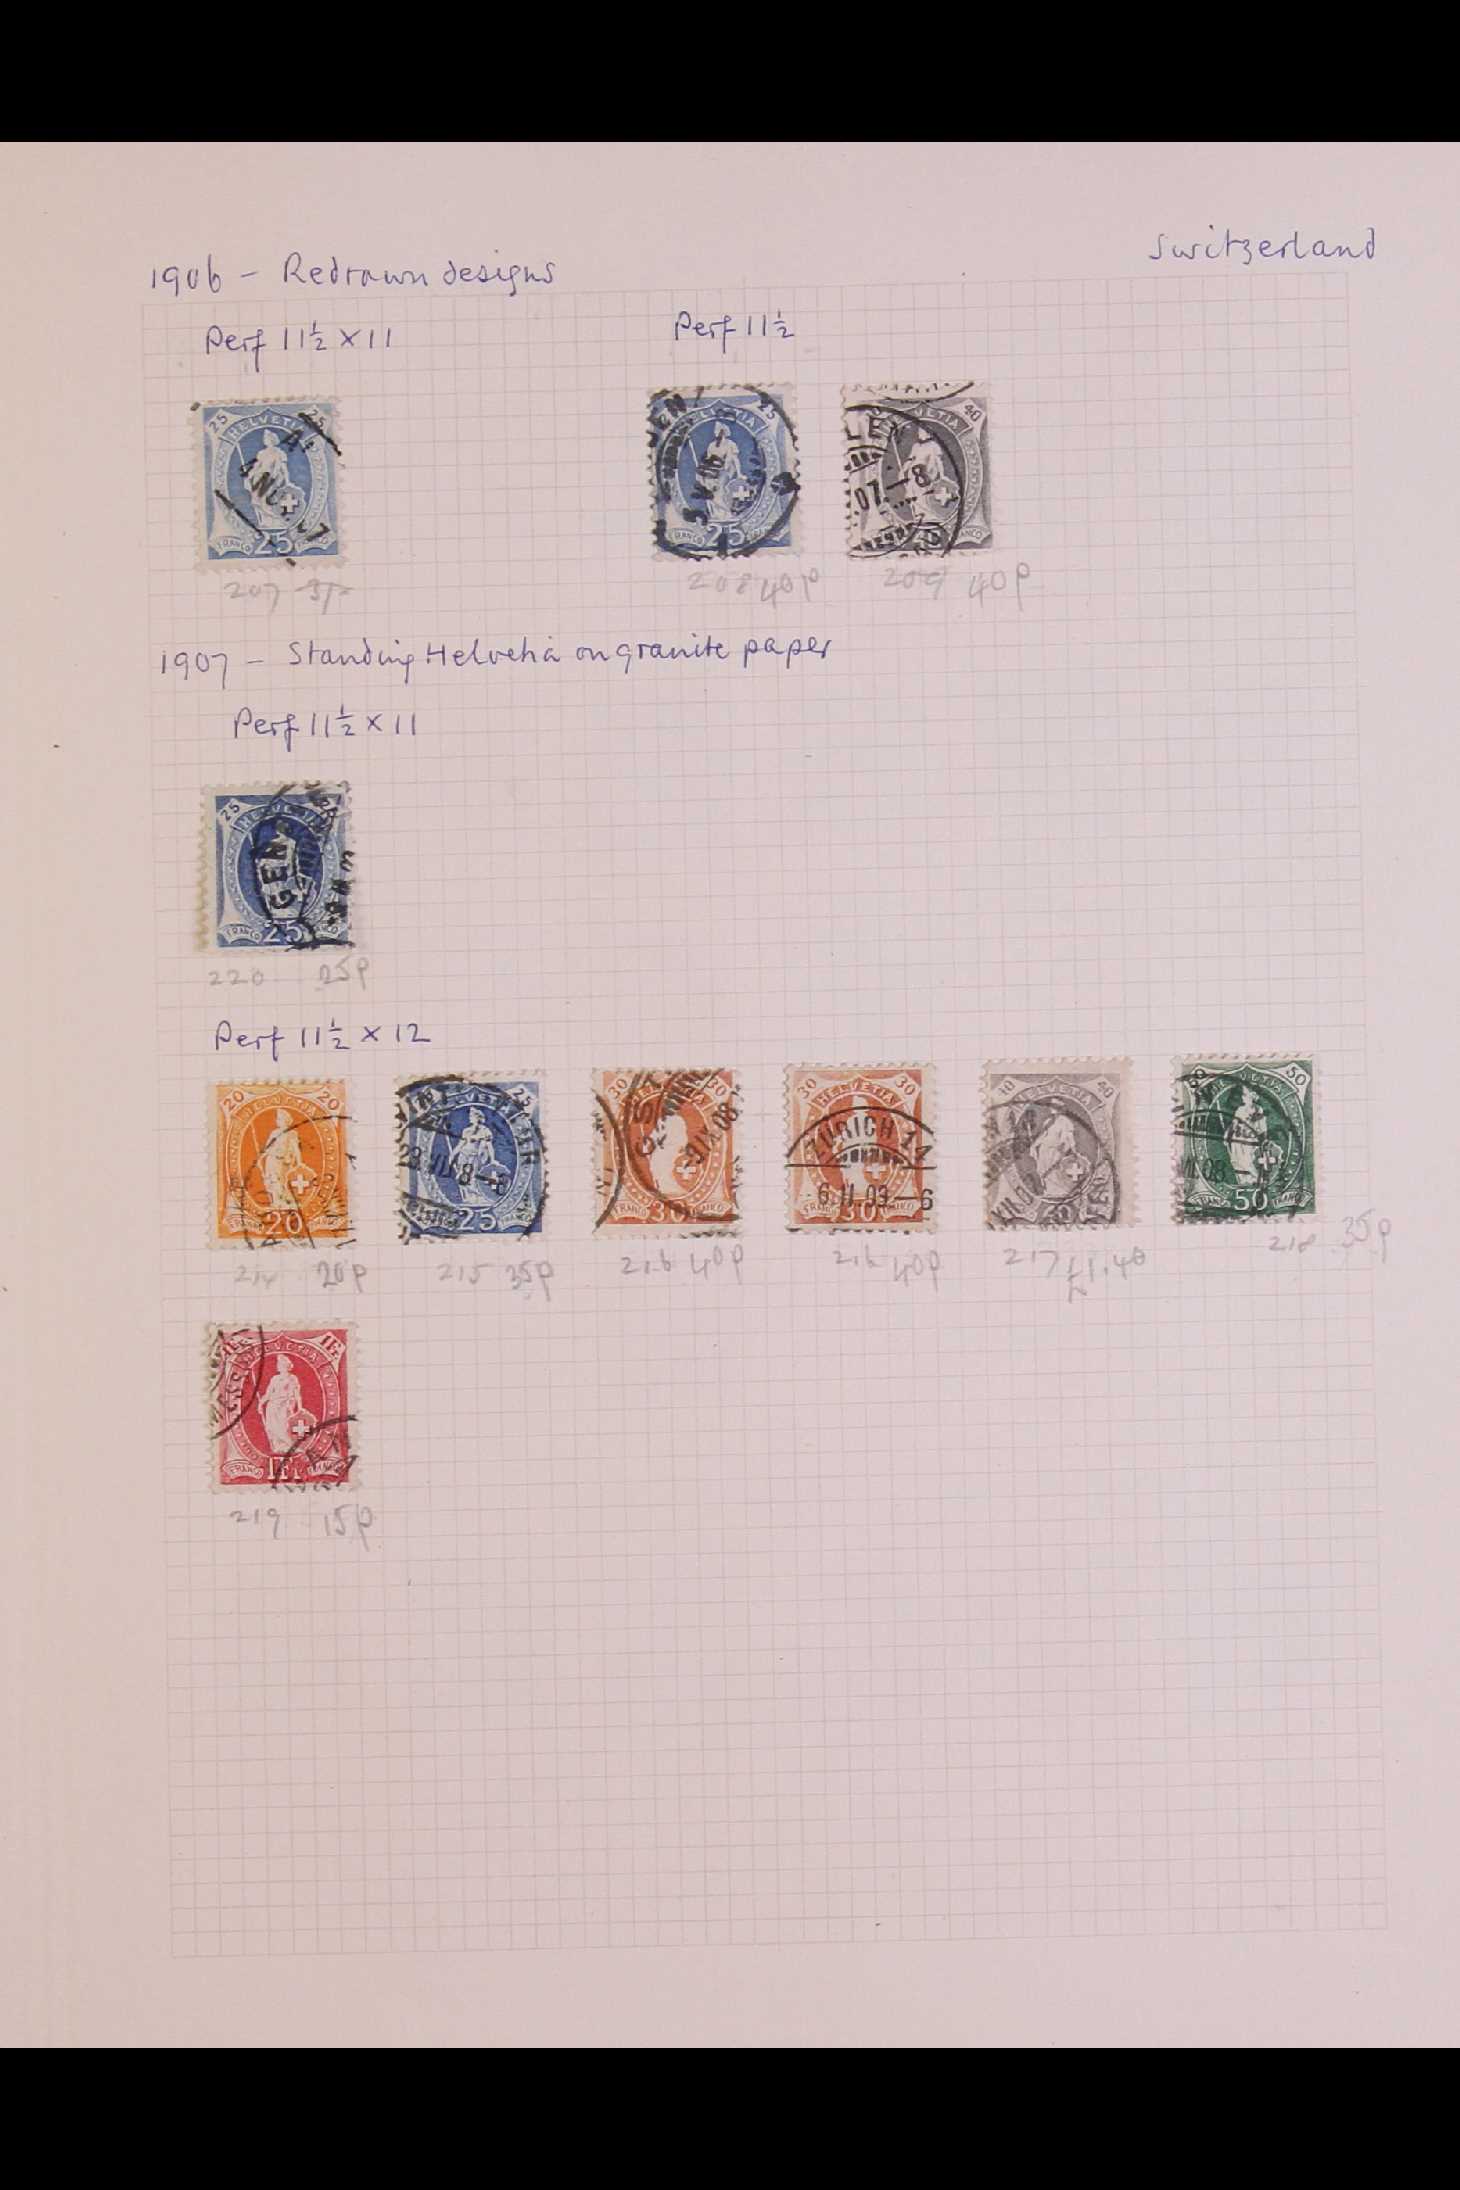 SWITZERLAND 1850 - 1959 COLLECTION of chiefly used stamps on leaves, incl 1850 5r & 10r, 1851 5r, - Image 8 of 17